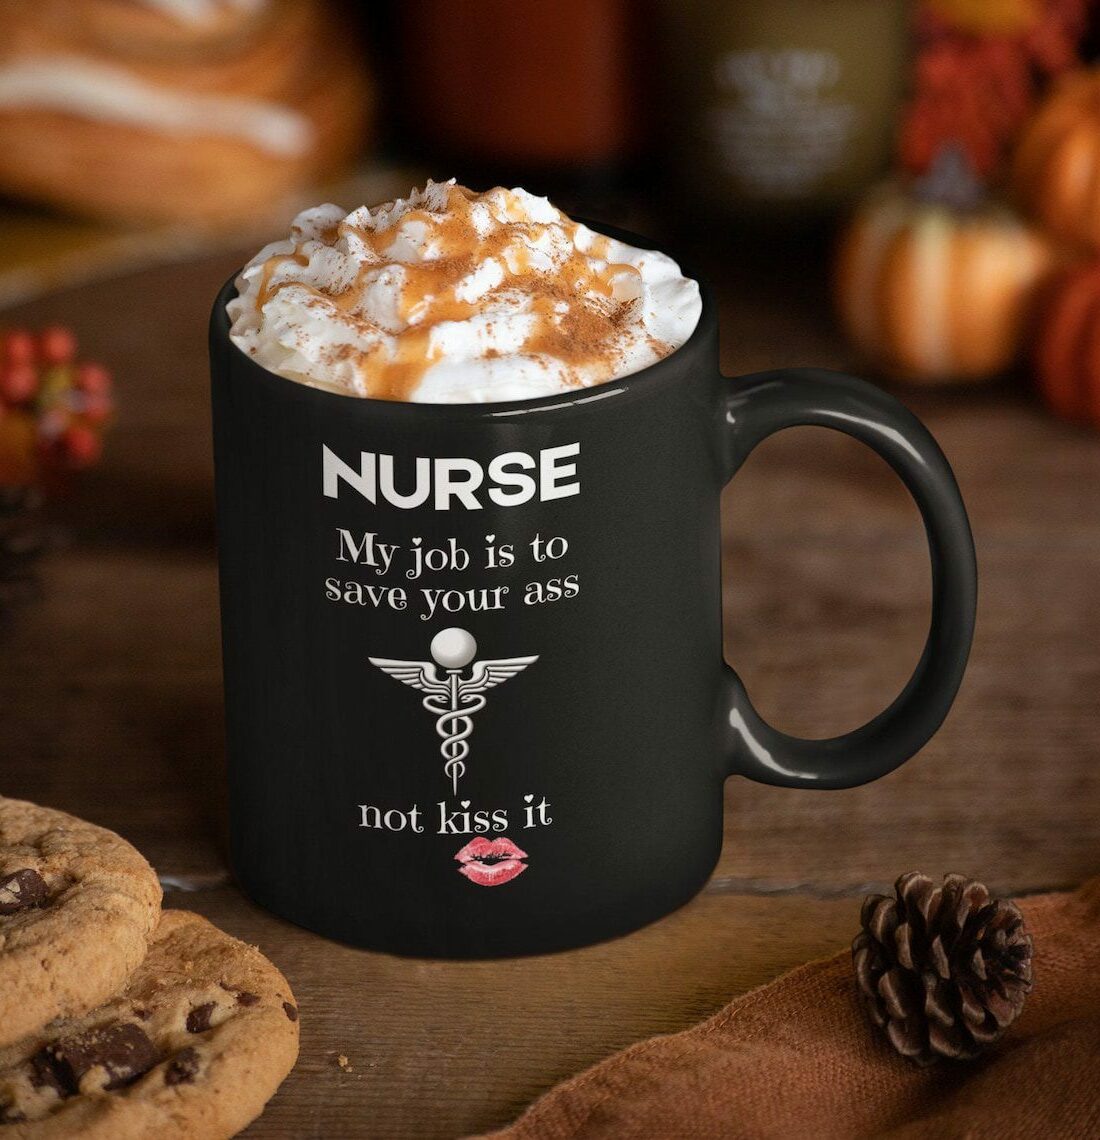 My job is to save your ass not kiss it| funny gift mug for nurse